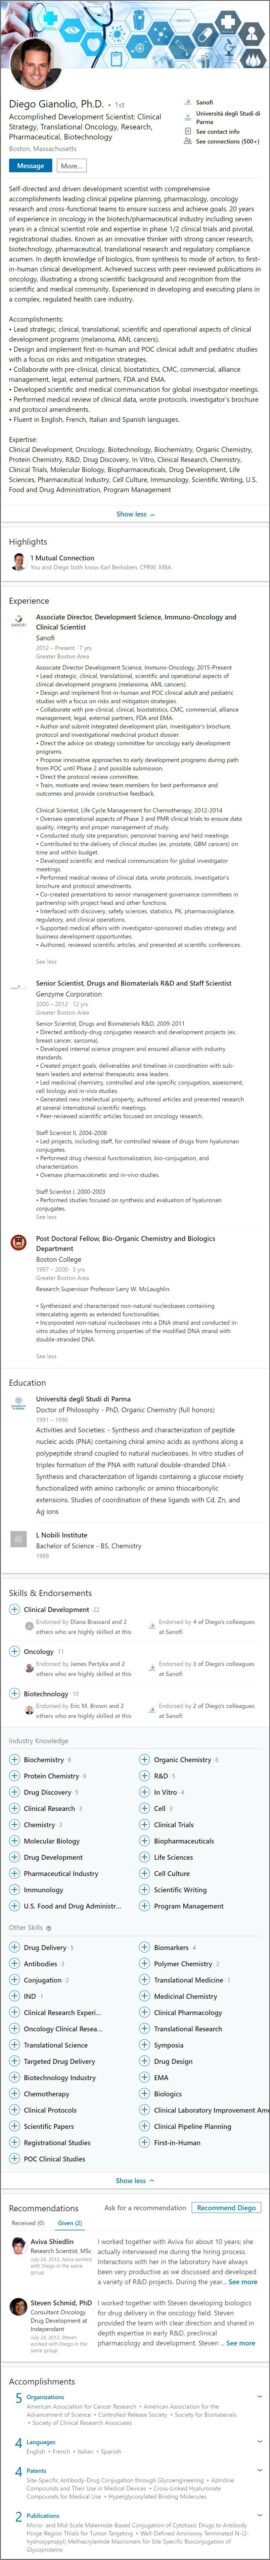 Resume Samples For Biotech Professionals